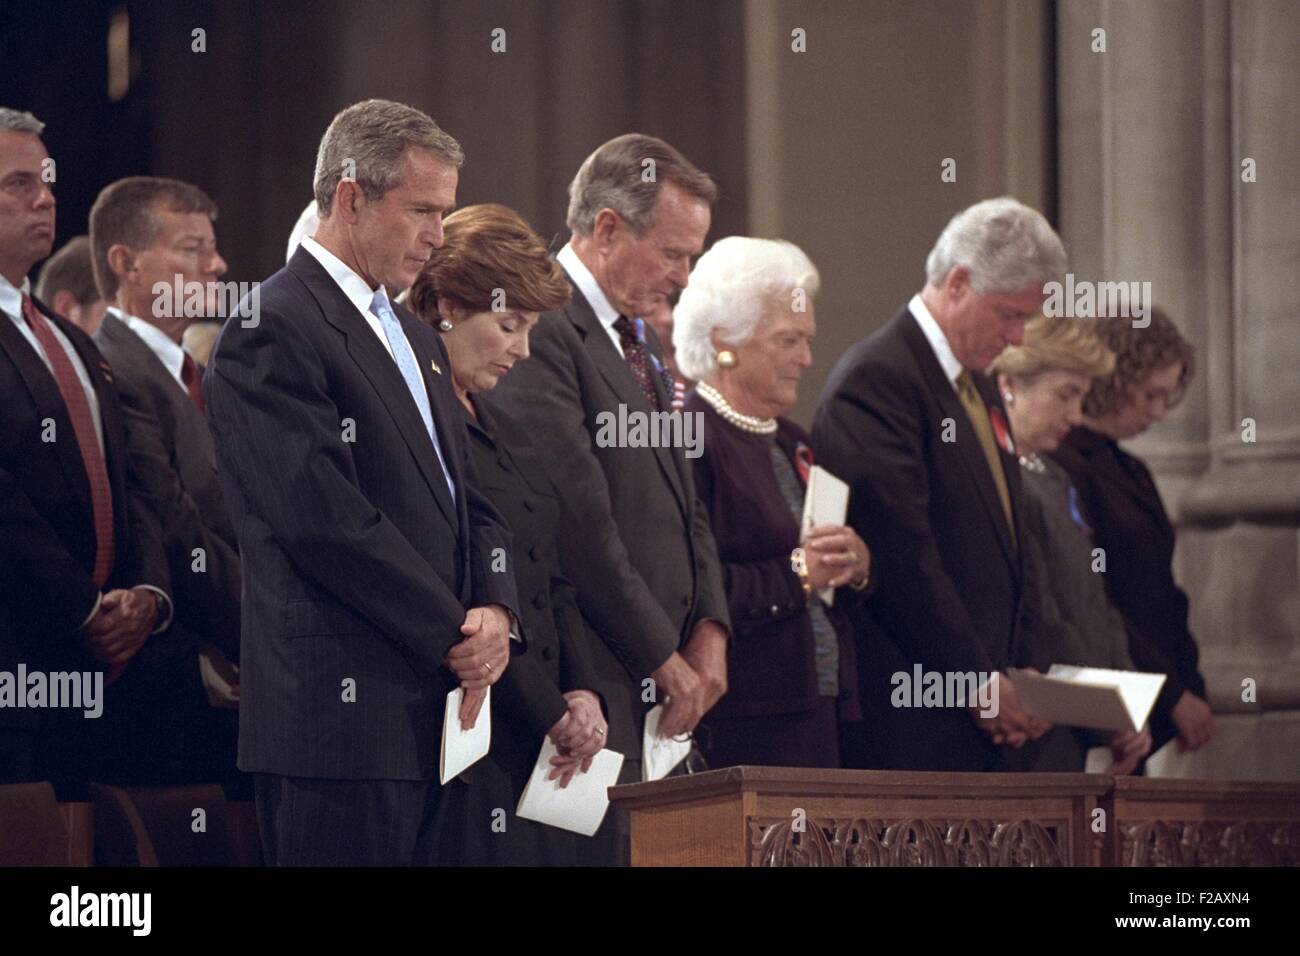 National Day of Prayer and Remembrance service on Sept. 14, 2001. At National Cathedral, L-R: President George W. Bush, Mrs. Laura Bush, Former President George H. W. Bush, Mrs. Barbara Bush, Former President Bill Clinton, Sen. Hillary Rodham Clinton, and Chelsea Clinton. (BSLOC 2015 2 149) Stock Photo